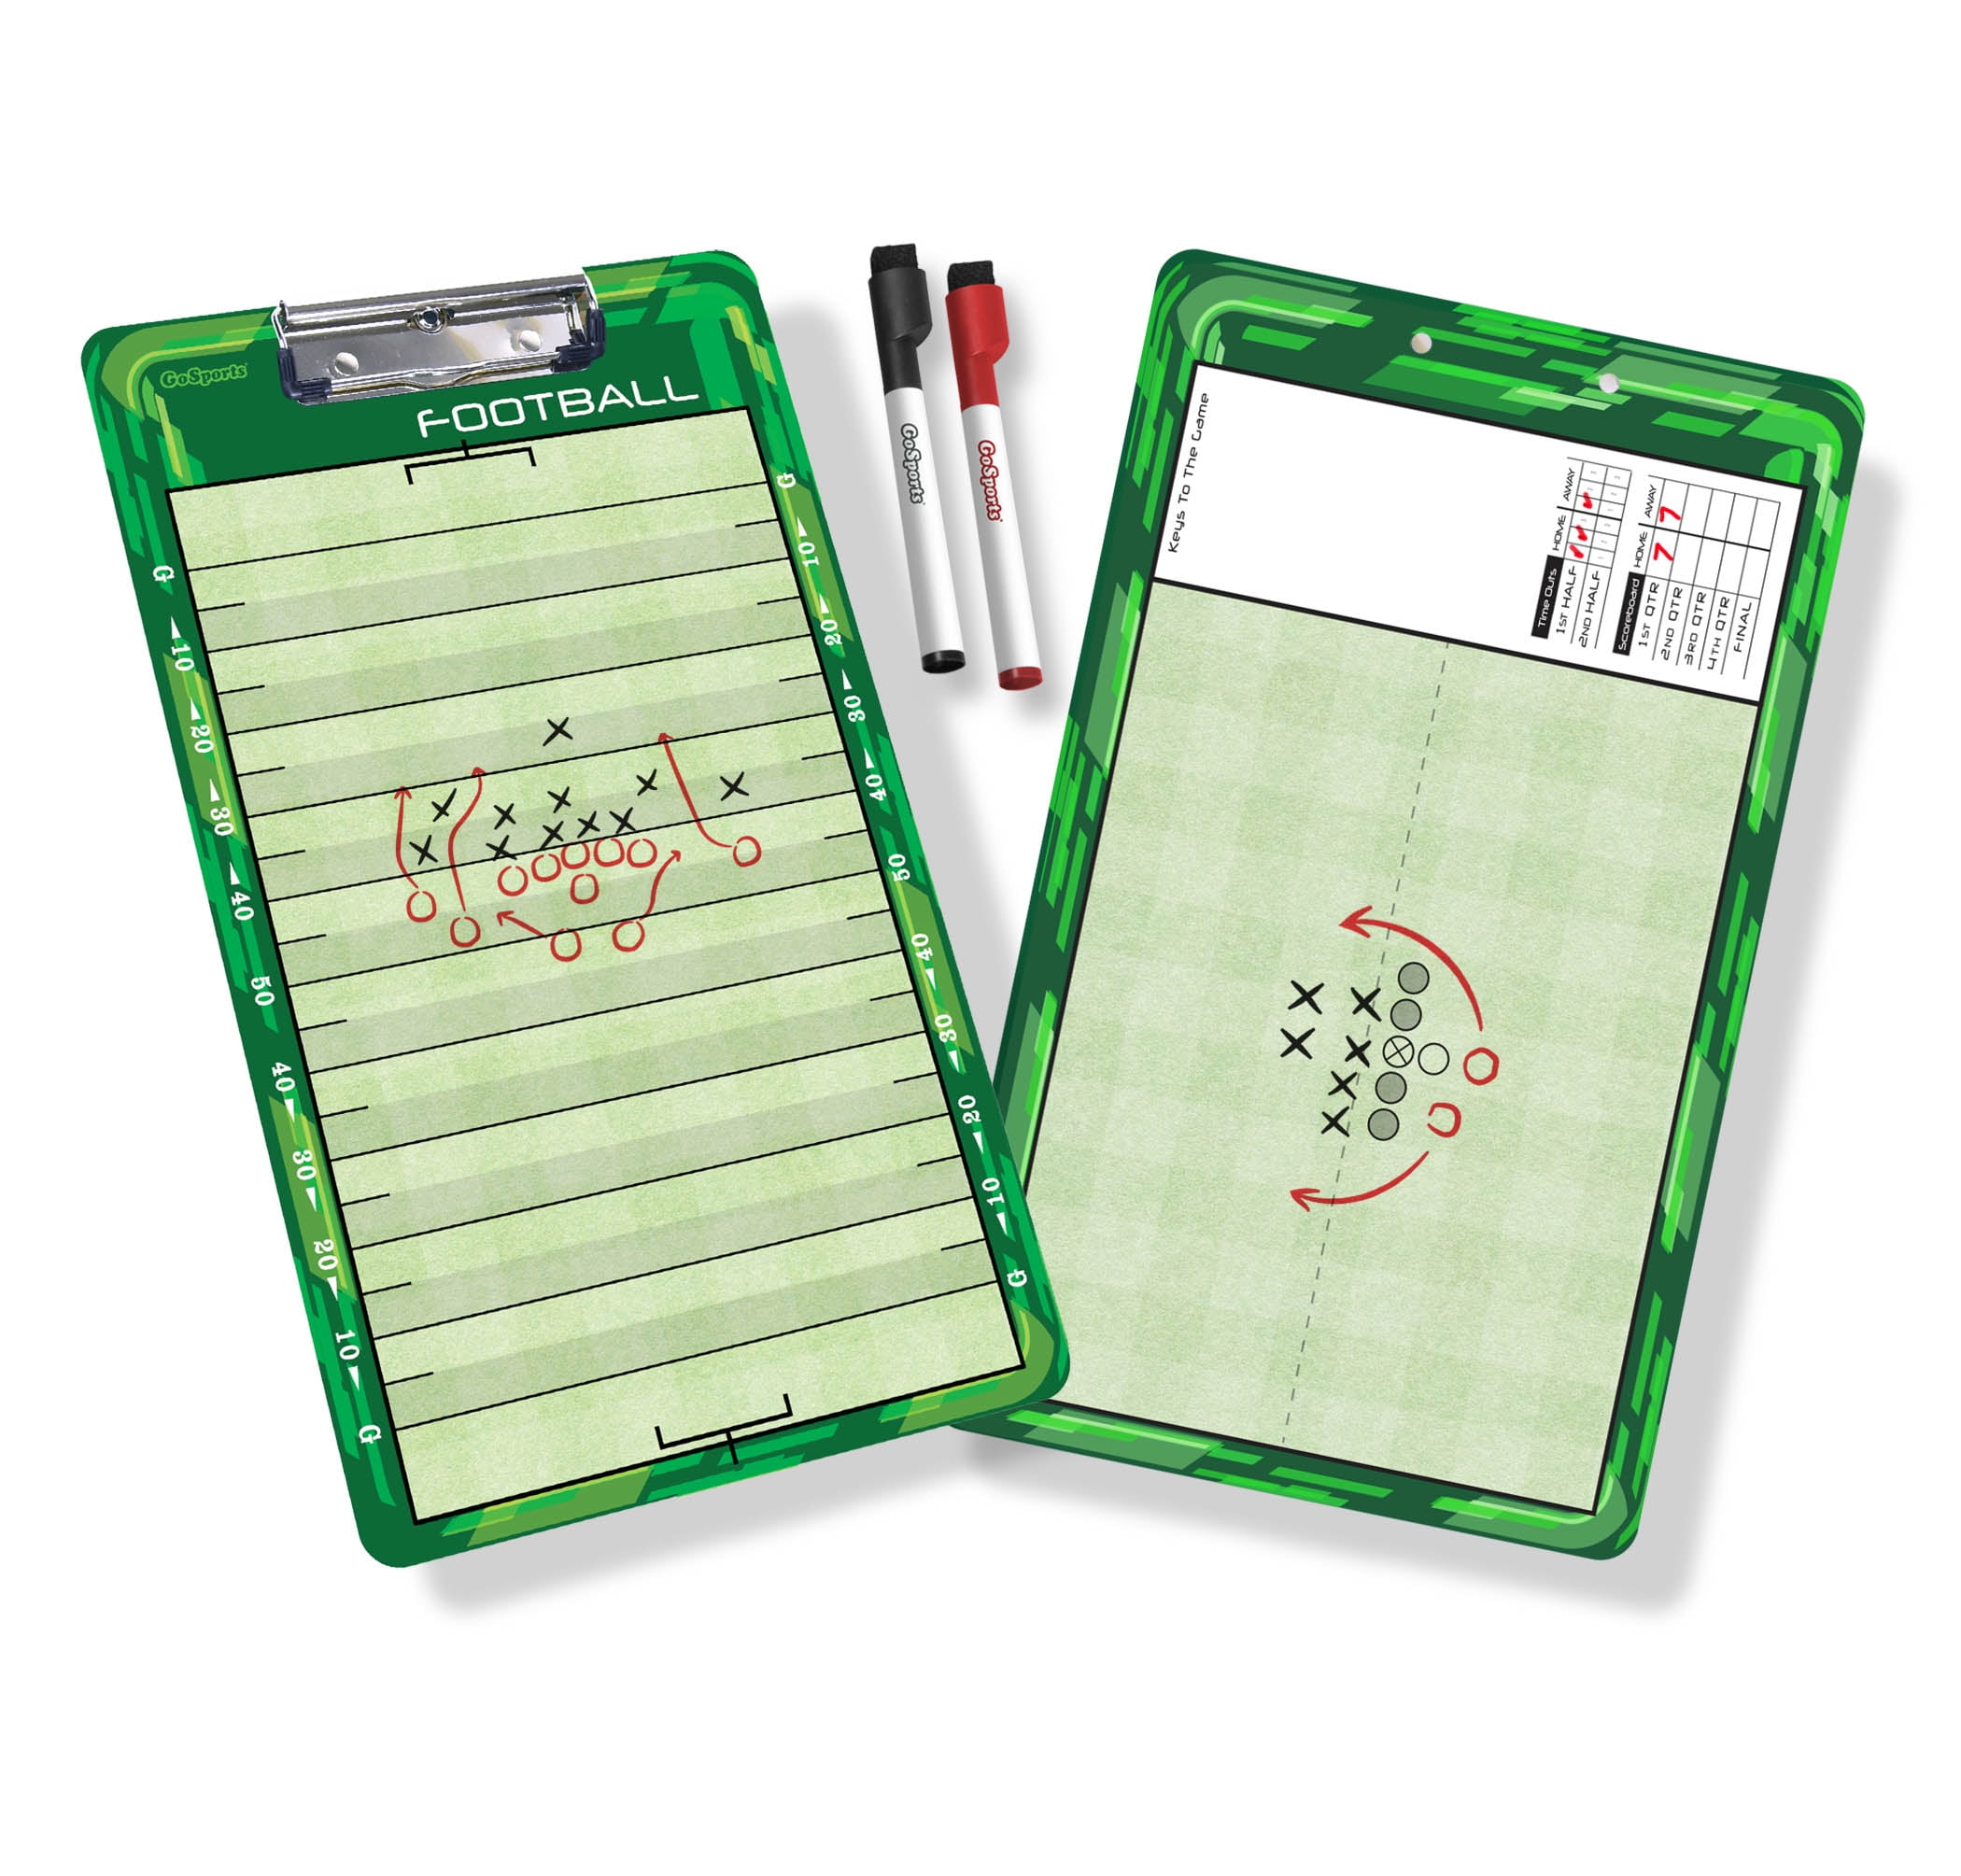 GoSports Football Coach&amp;#39;s Dry Erase Board 2 Sided Full Field and Stat Tracker Design w/ 2 Dry-Erase Markers